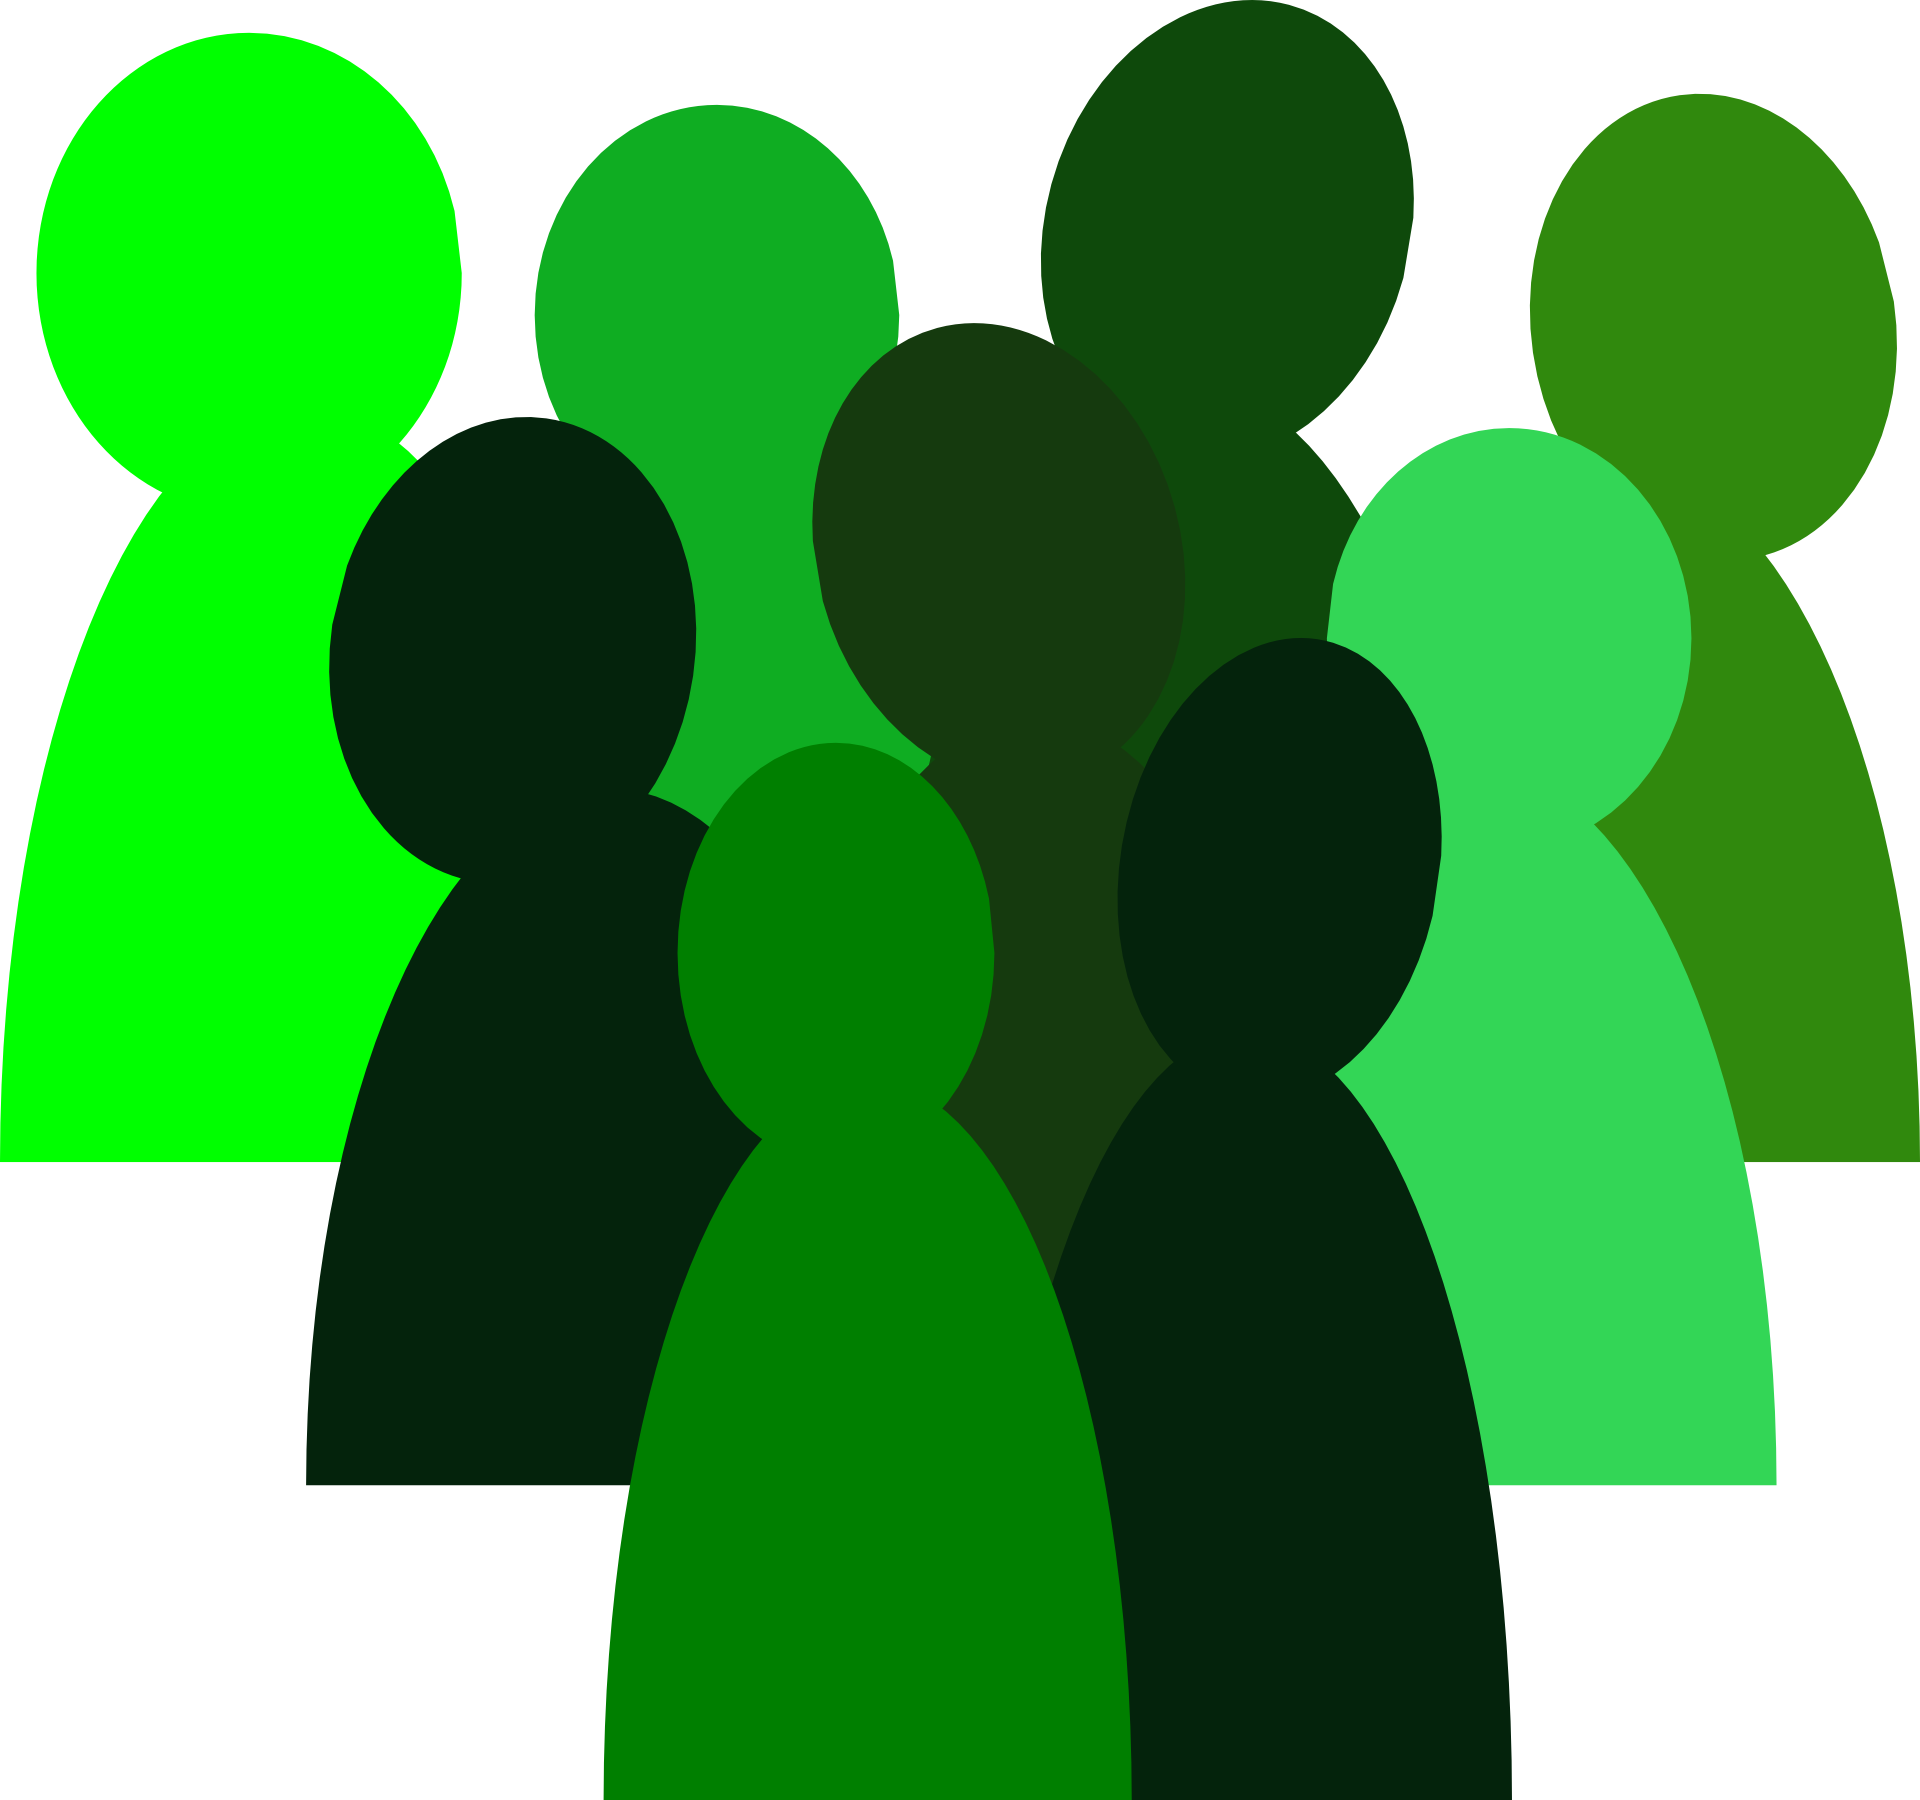 Green color icon for. Crowd clipart group travel